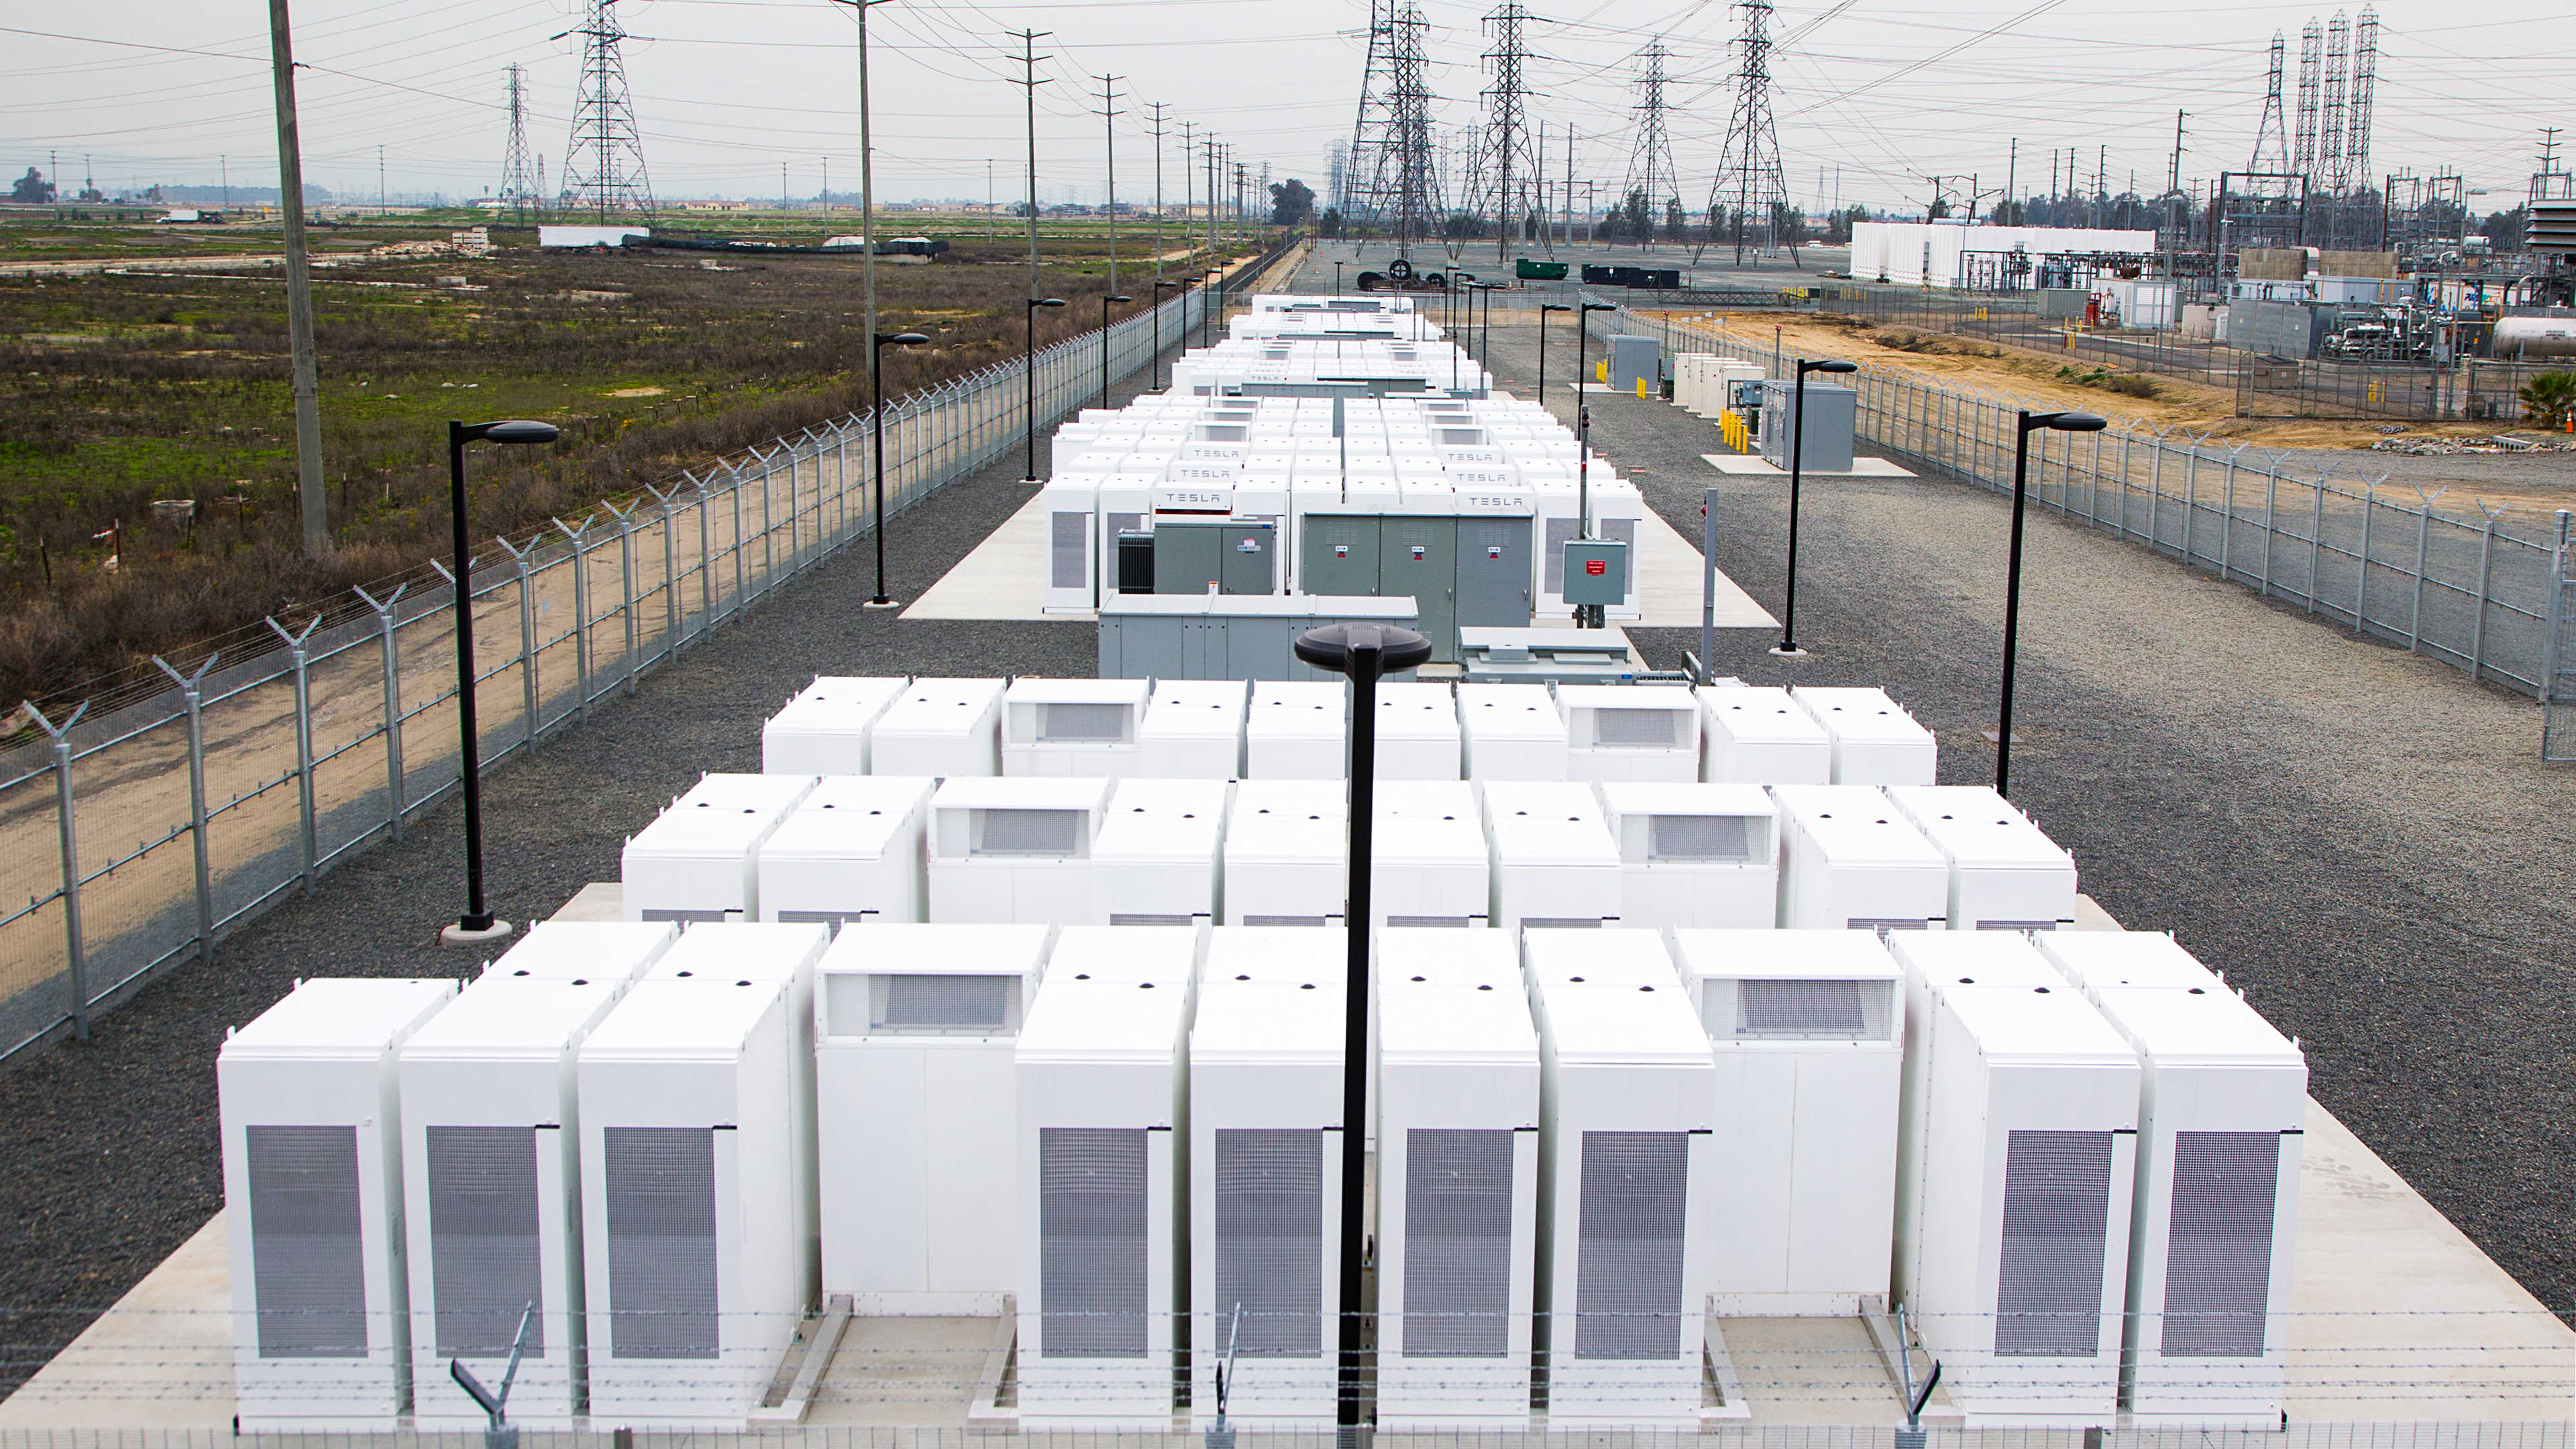 Commercial and industrial energy storage: Fresh moves in a slow-moving market segment